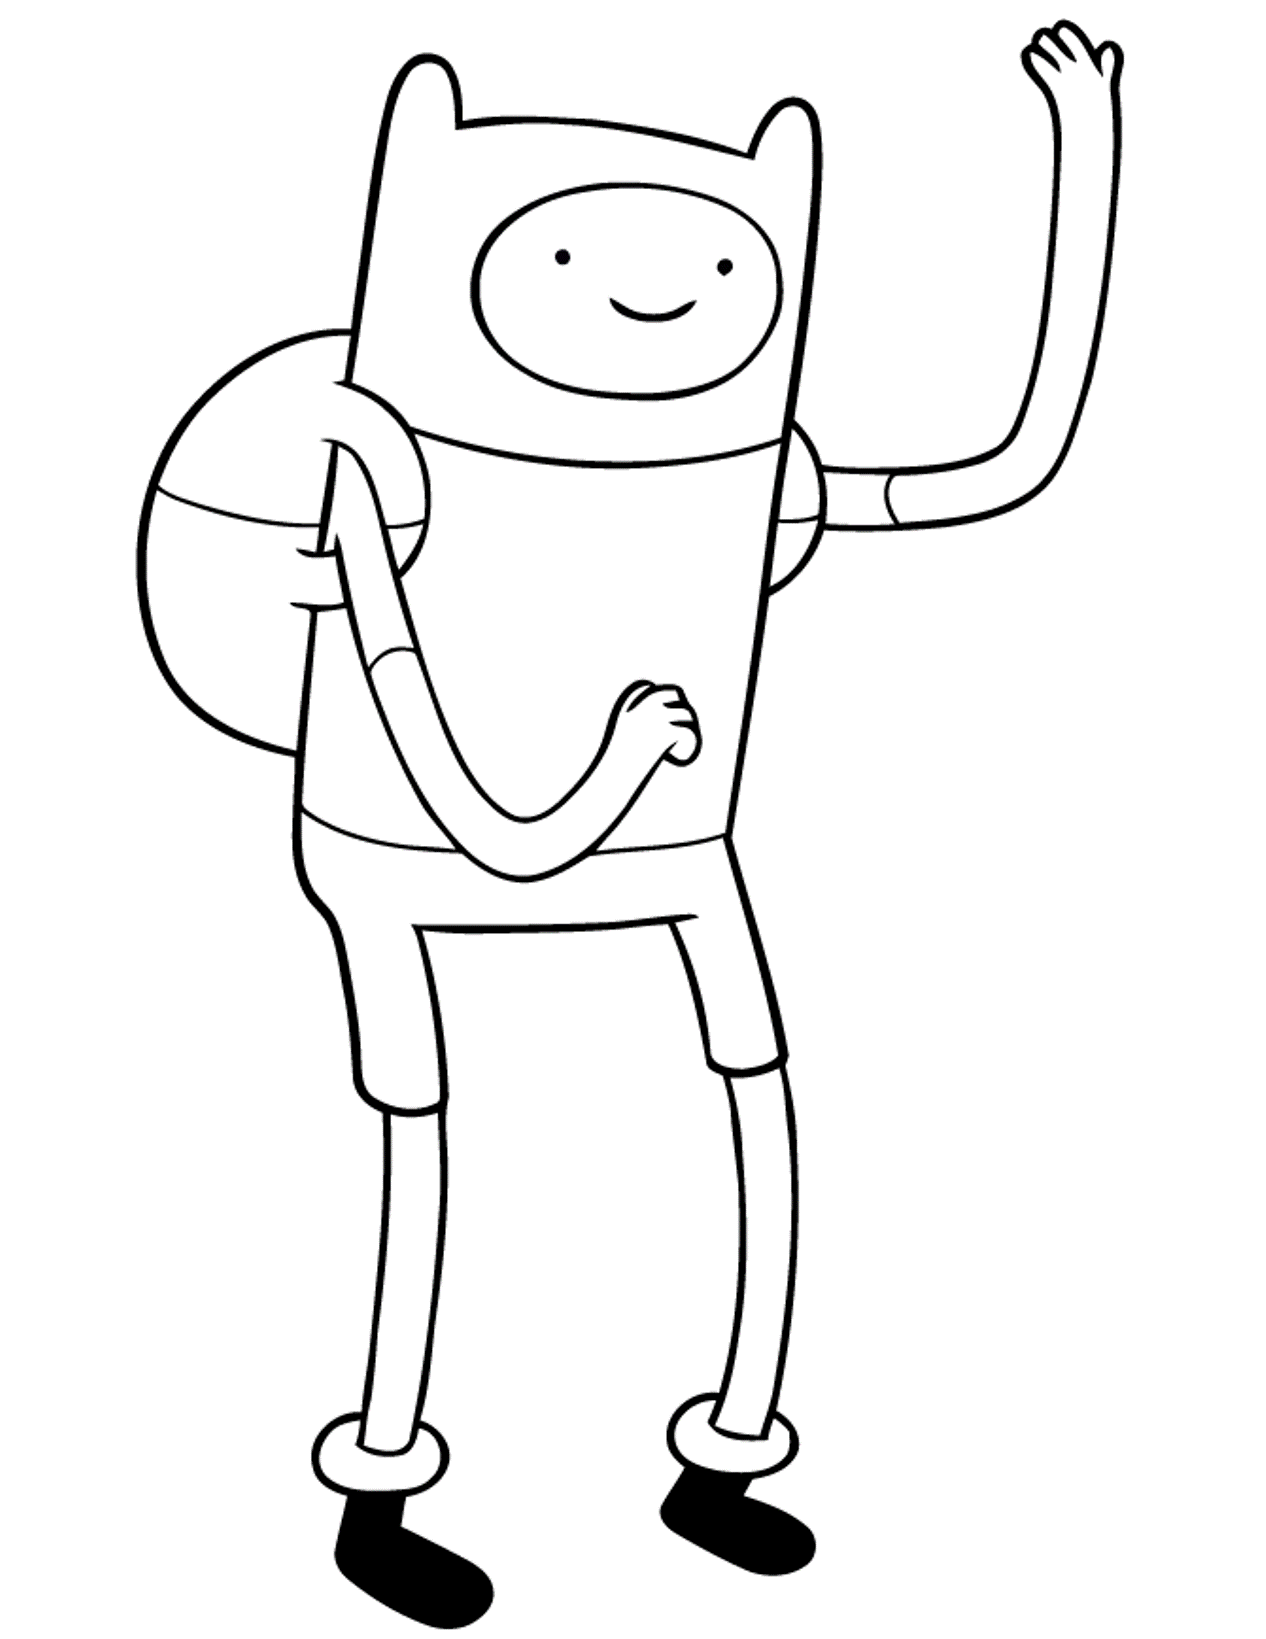 Adventure Time Coloring Pages Finn | Cartoon Coloring pages of ...